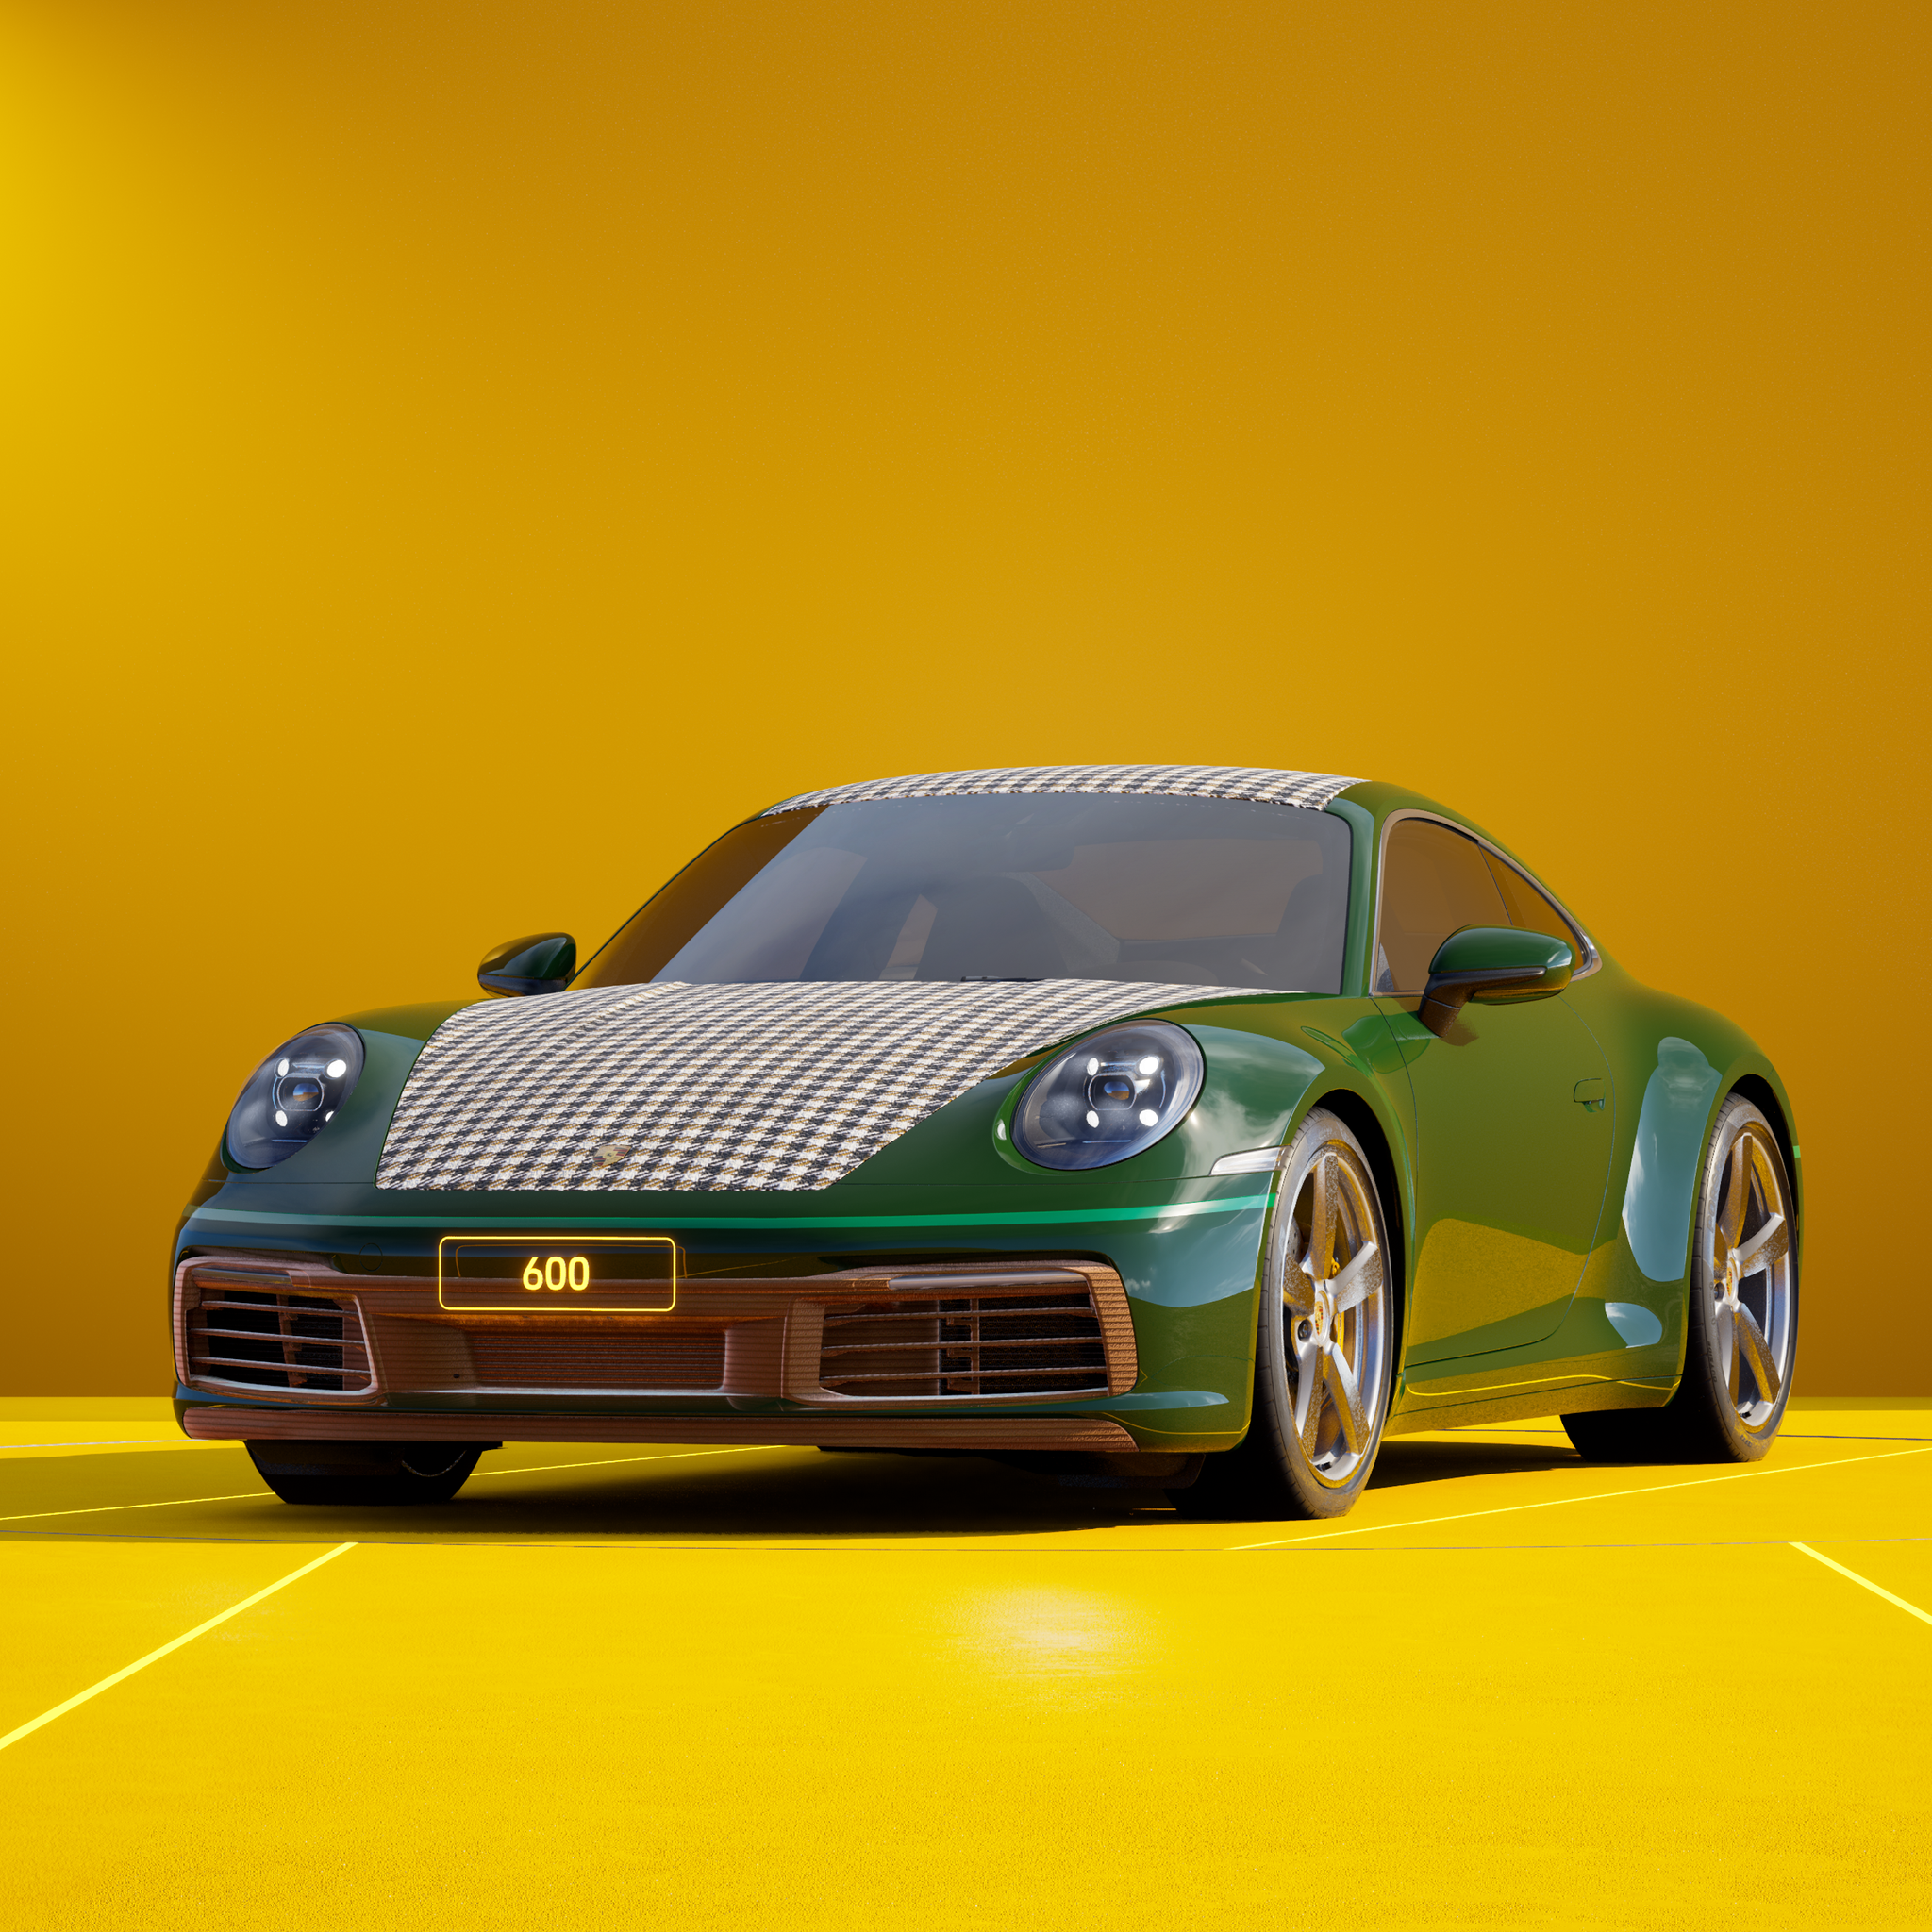 The PORSCHΞ 911 600 image in phase